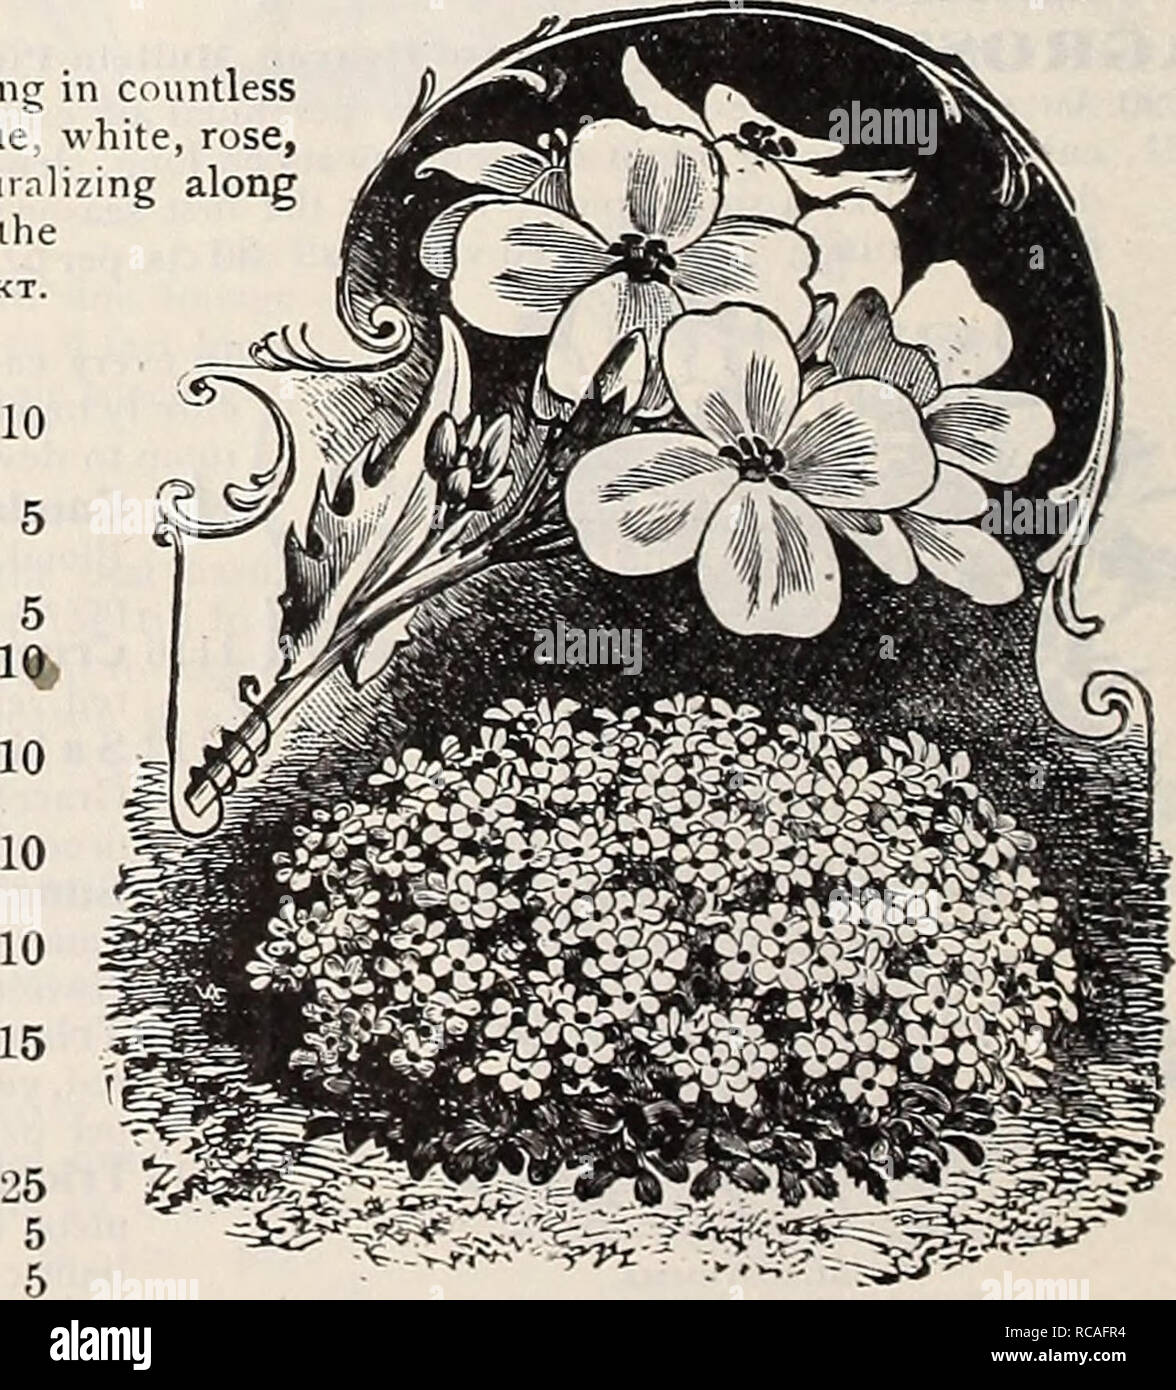 . Dreer's garden book : 1906. Seeds Catalogs; Nursery stock Catalogs; Gardening Equipment and supplies Catalogs; Flowers Seeds Catalogs; Vegetables Seeds Catalogs; Fruit Seeds Catalogs. ANTHEMIS. (Hardy Marguerite.) 1150 Tinctoria Kelwayi. A most satisfactory hardy per- ennial, bearing all summer daisy-like golden-yellow blossoms ; excellent for cut- ting; 2 feet. 50 cts. per oz ARABIS (Rock Cress). 1201 Alpina. The earliest, pret- tiest spring flower. The spreading tufts are covered with a sheet of pure while flowers as soon as the snow disappears. Unequalled for rockeries or edgings ; with-  Stock Photo